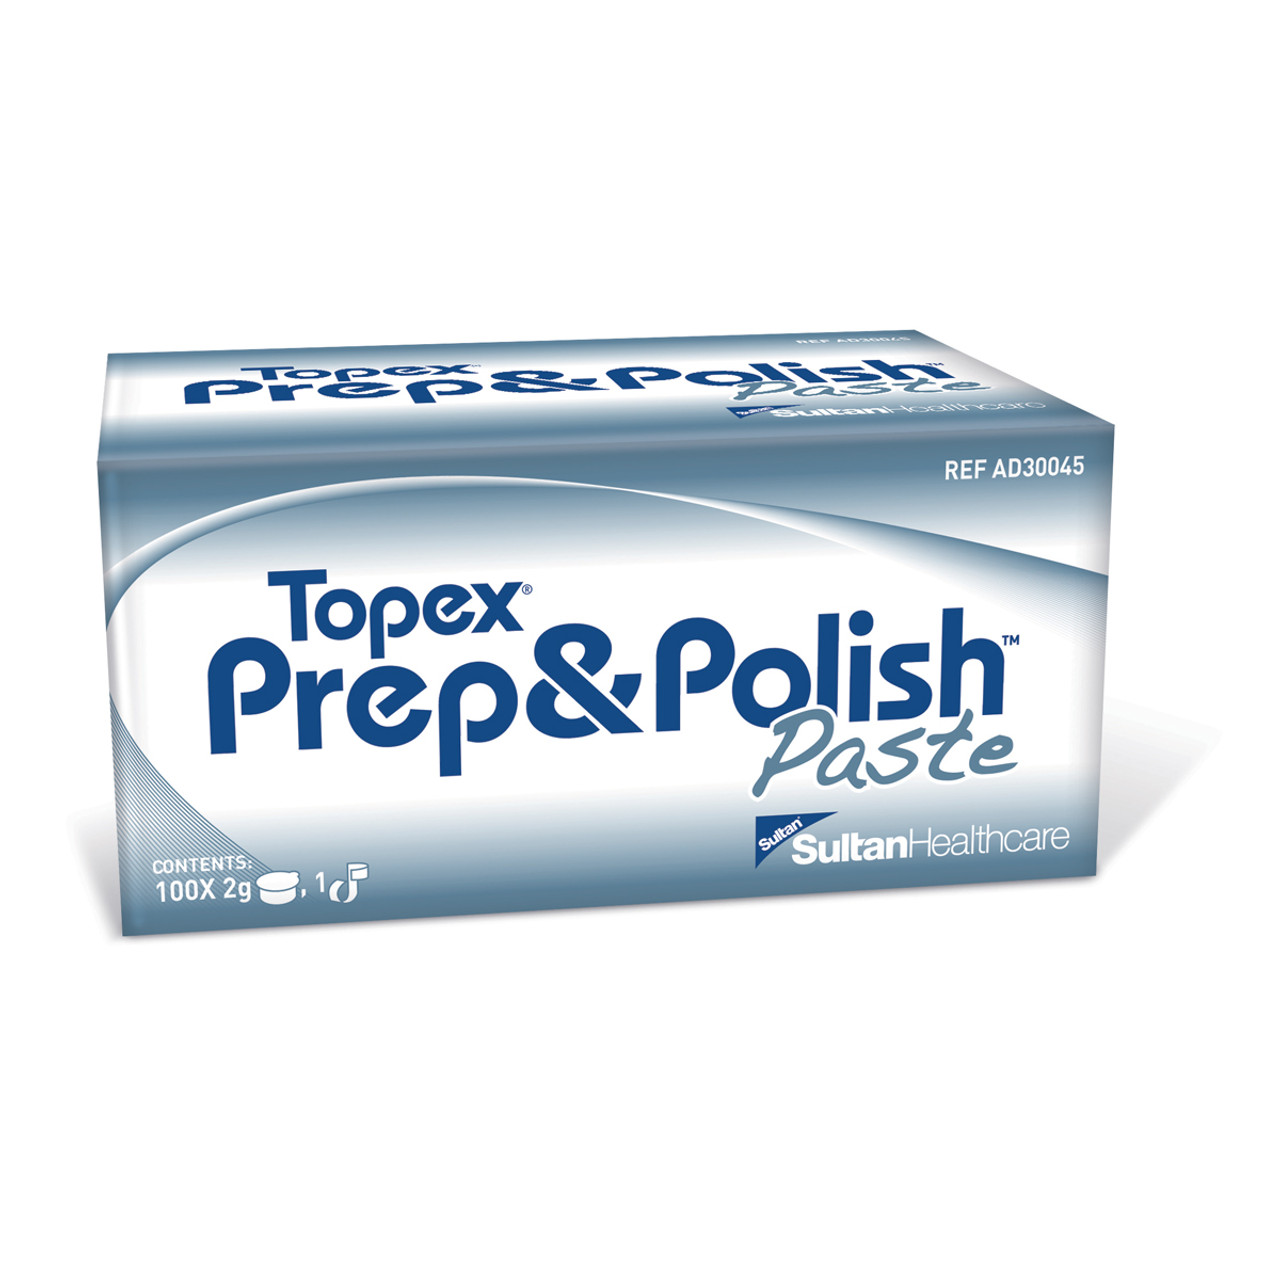 SULTAN TOPEX PROPHYLAXIS PASTE, AD30012